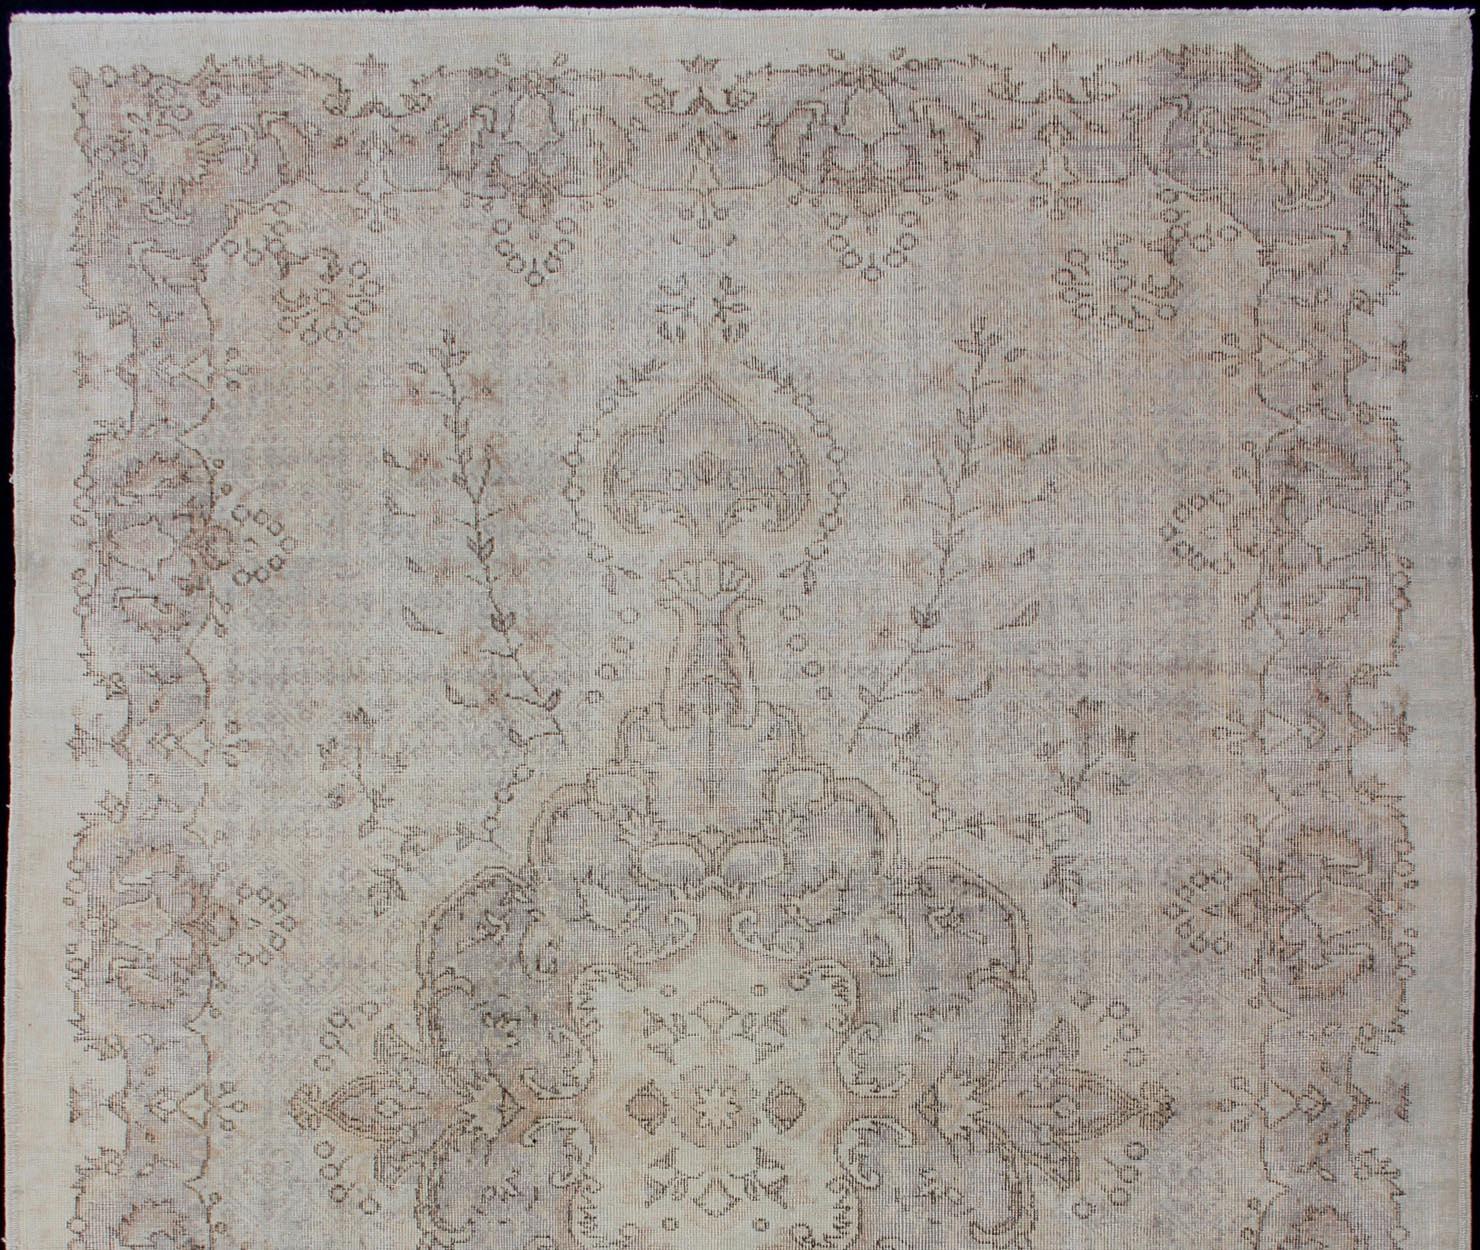   Keivan Woven Arts Vintage Turkish Distressed Rug in Sand, Cream, lavender, Taupe with brown highlights 

Measures:6'7 x 10'5  

Sand, Taupe, cream and light lavender distressed vintage rug from Turkey with medallion design of etched motifs, keivan